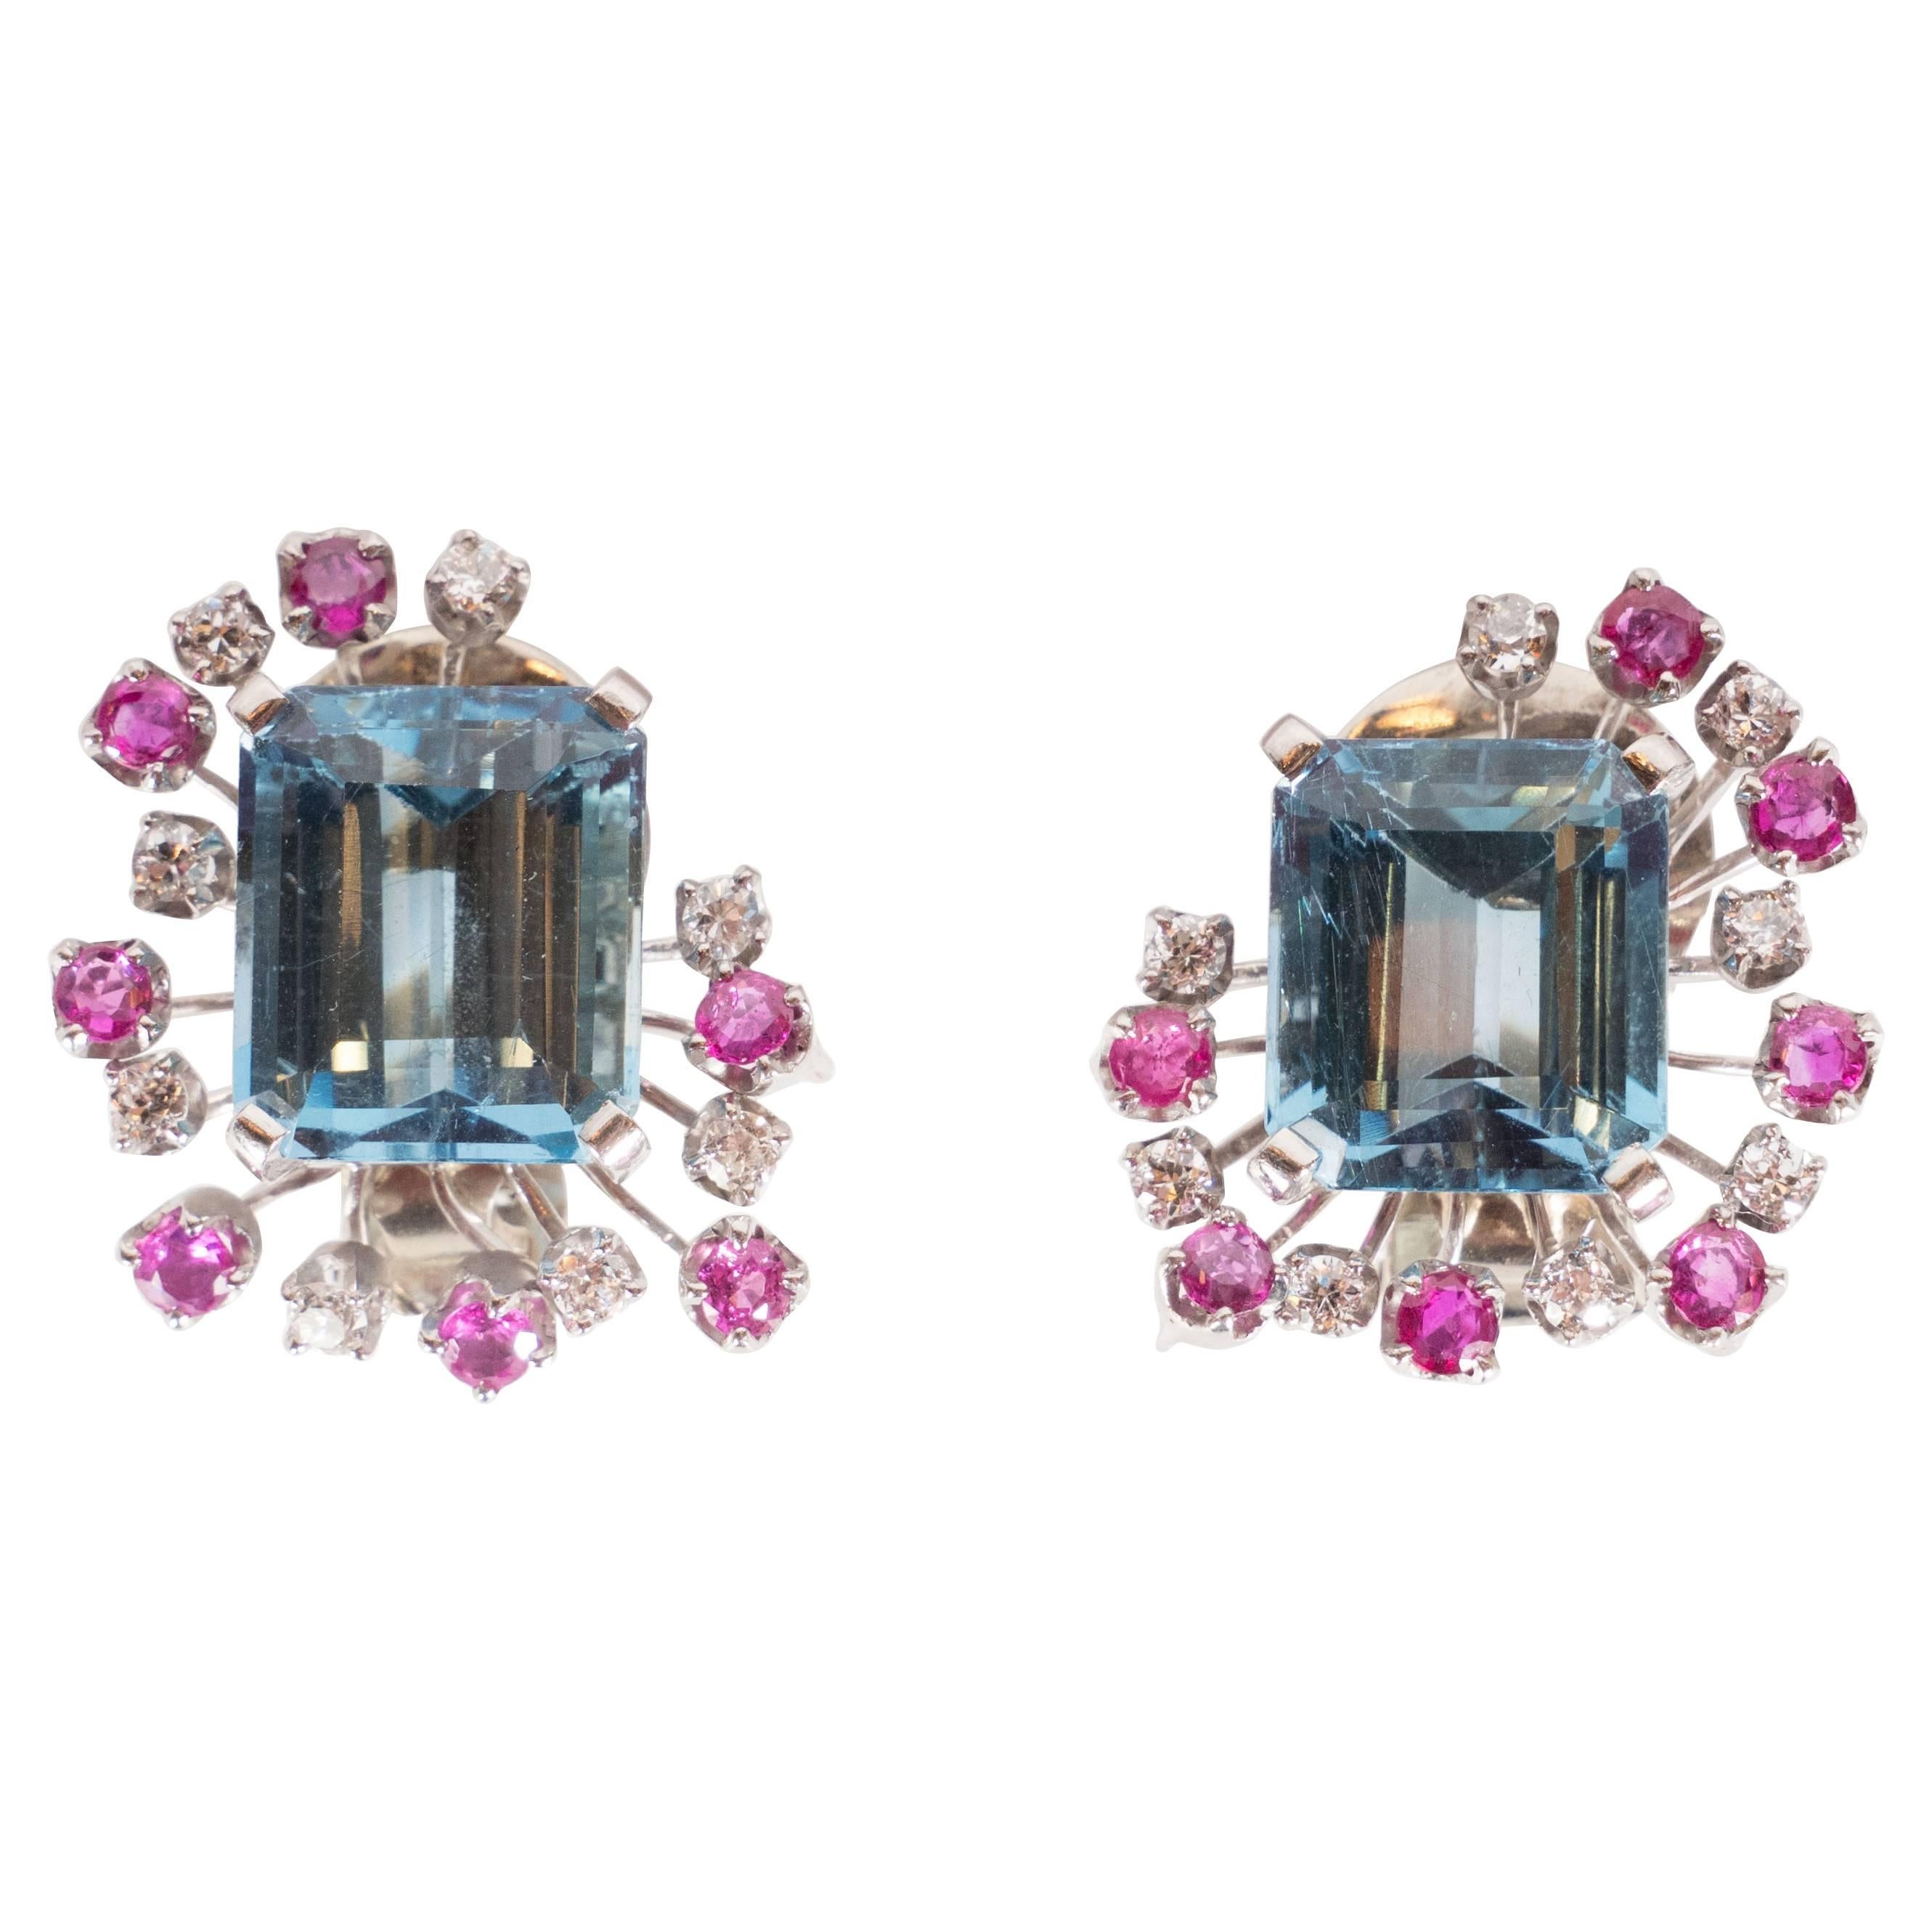 1940s 12 Carat Aquamarine and 14K White Gold Earrings with Diamonds &and Rubies